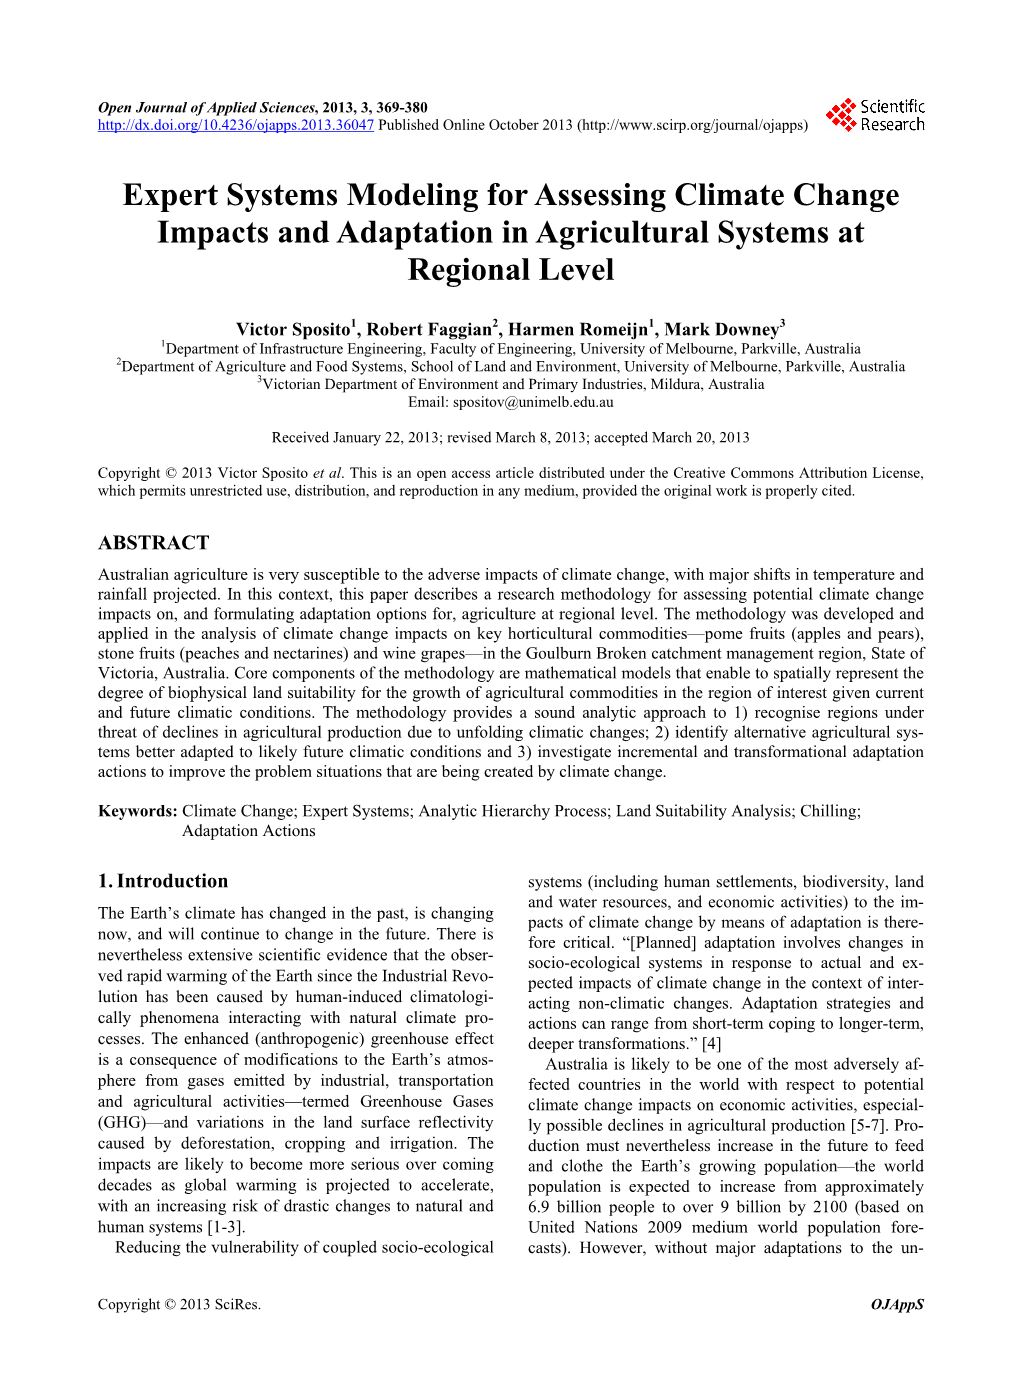 Expert Systems Modeling for Assessing Climate Change Impacts and Adaptation in Agricultural Systems at Regional Level